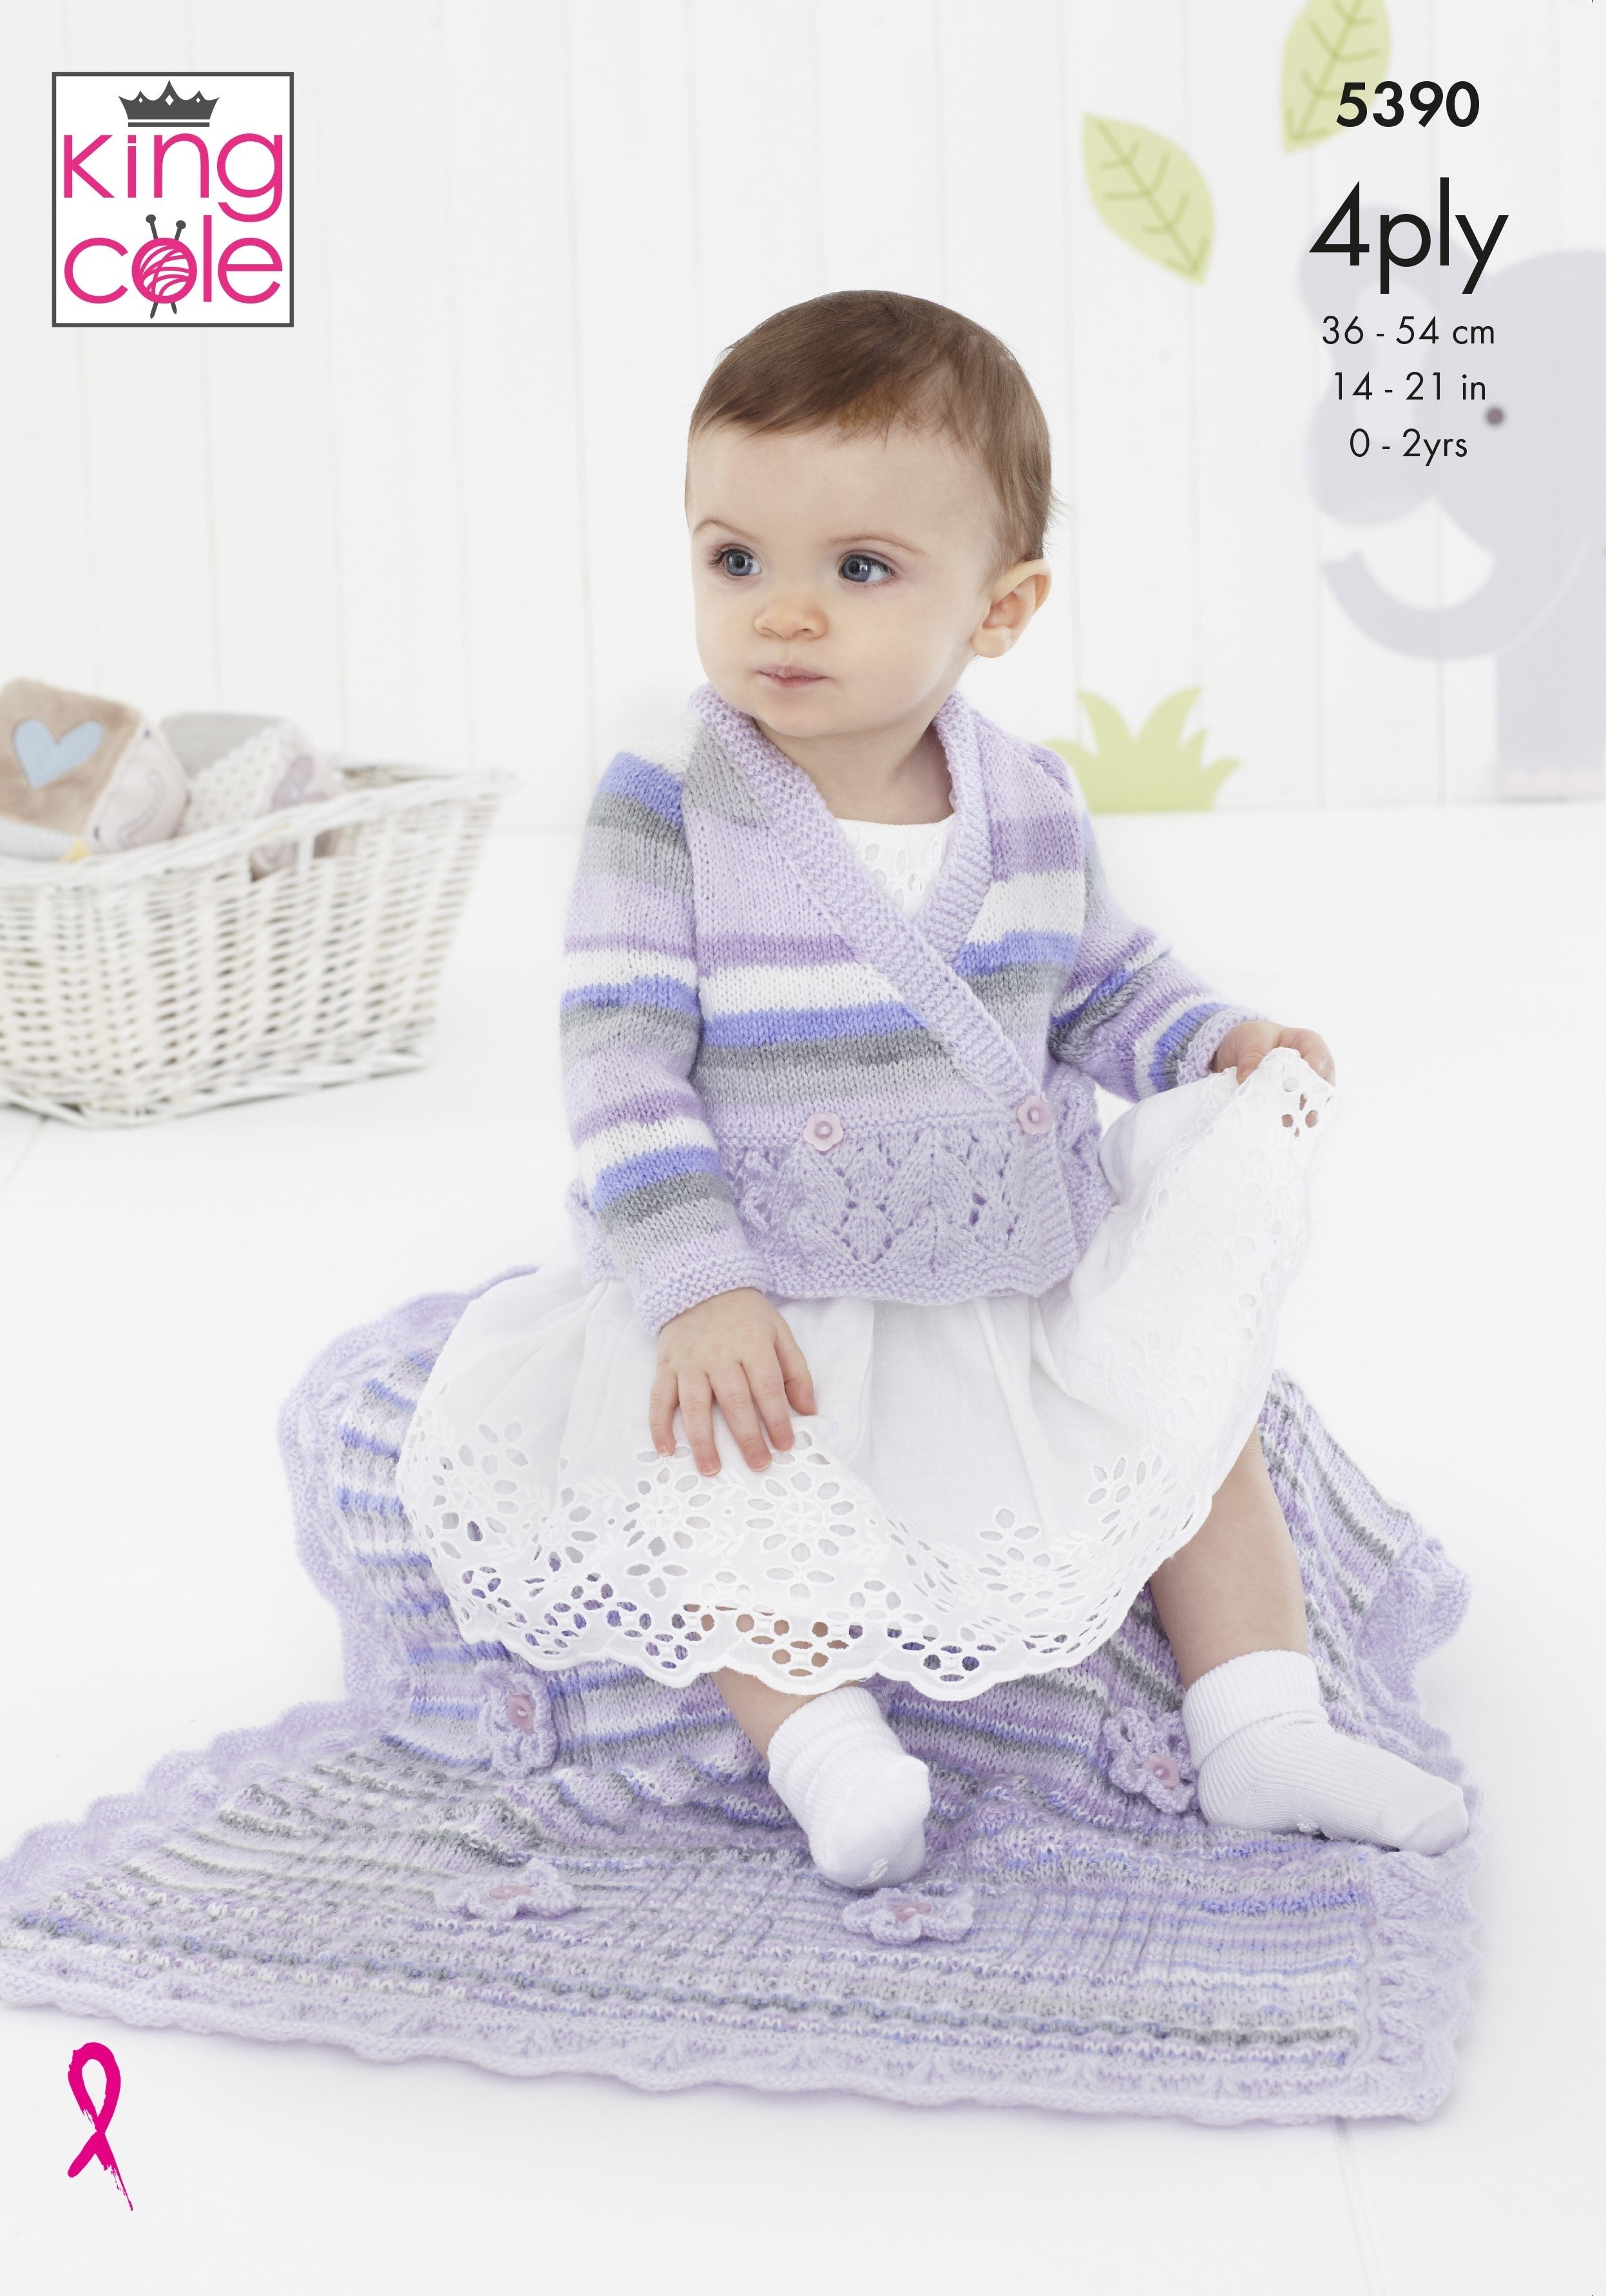 Cardigan, Pinafore Dress and Blanket - King Cole 5390